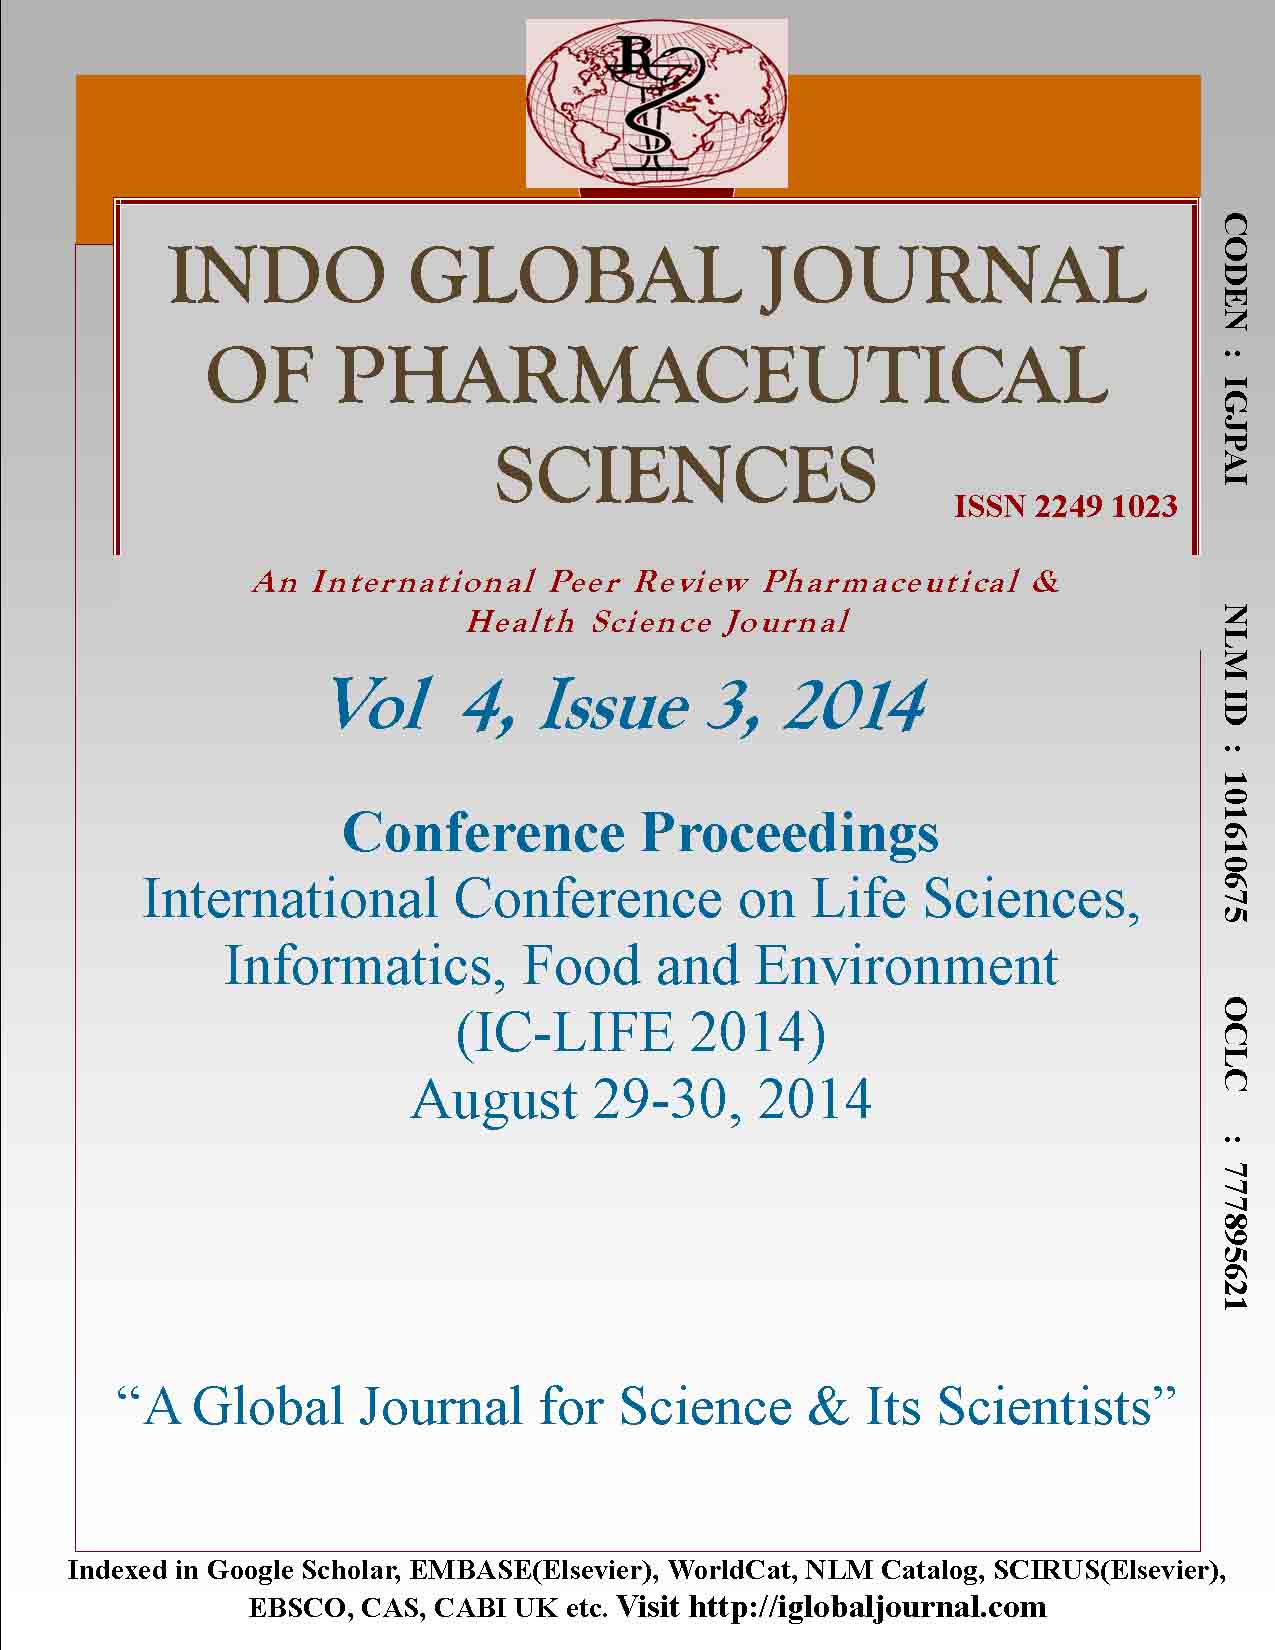 Front Cover IGJPS 2014, Vol 4, Issue 3